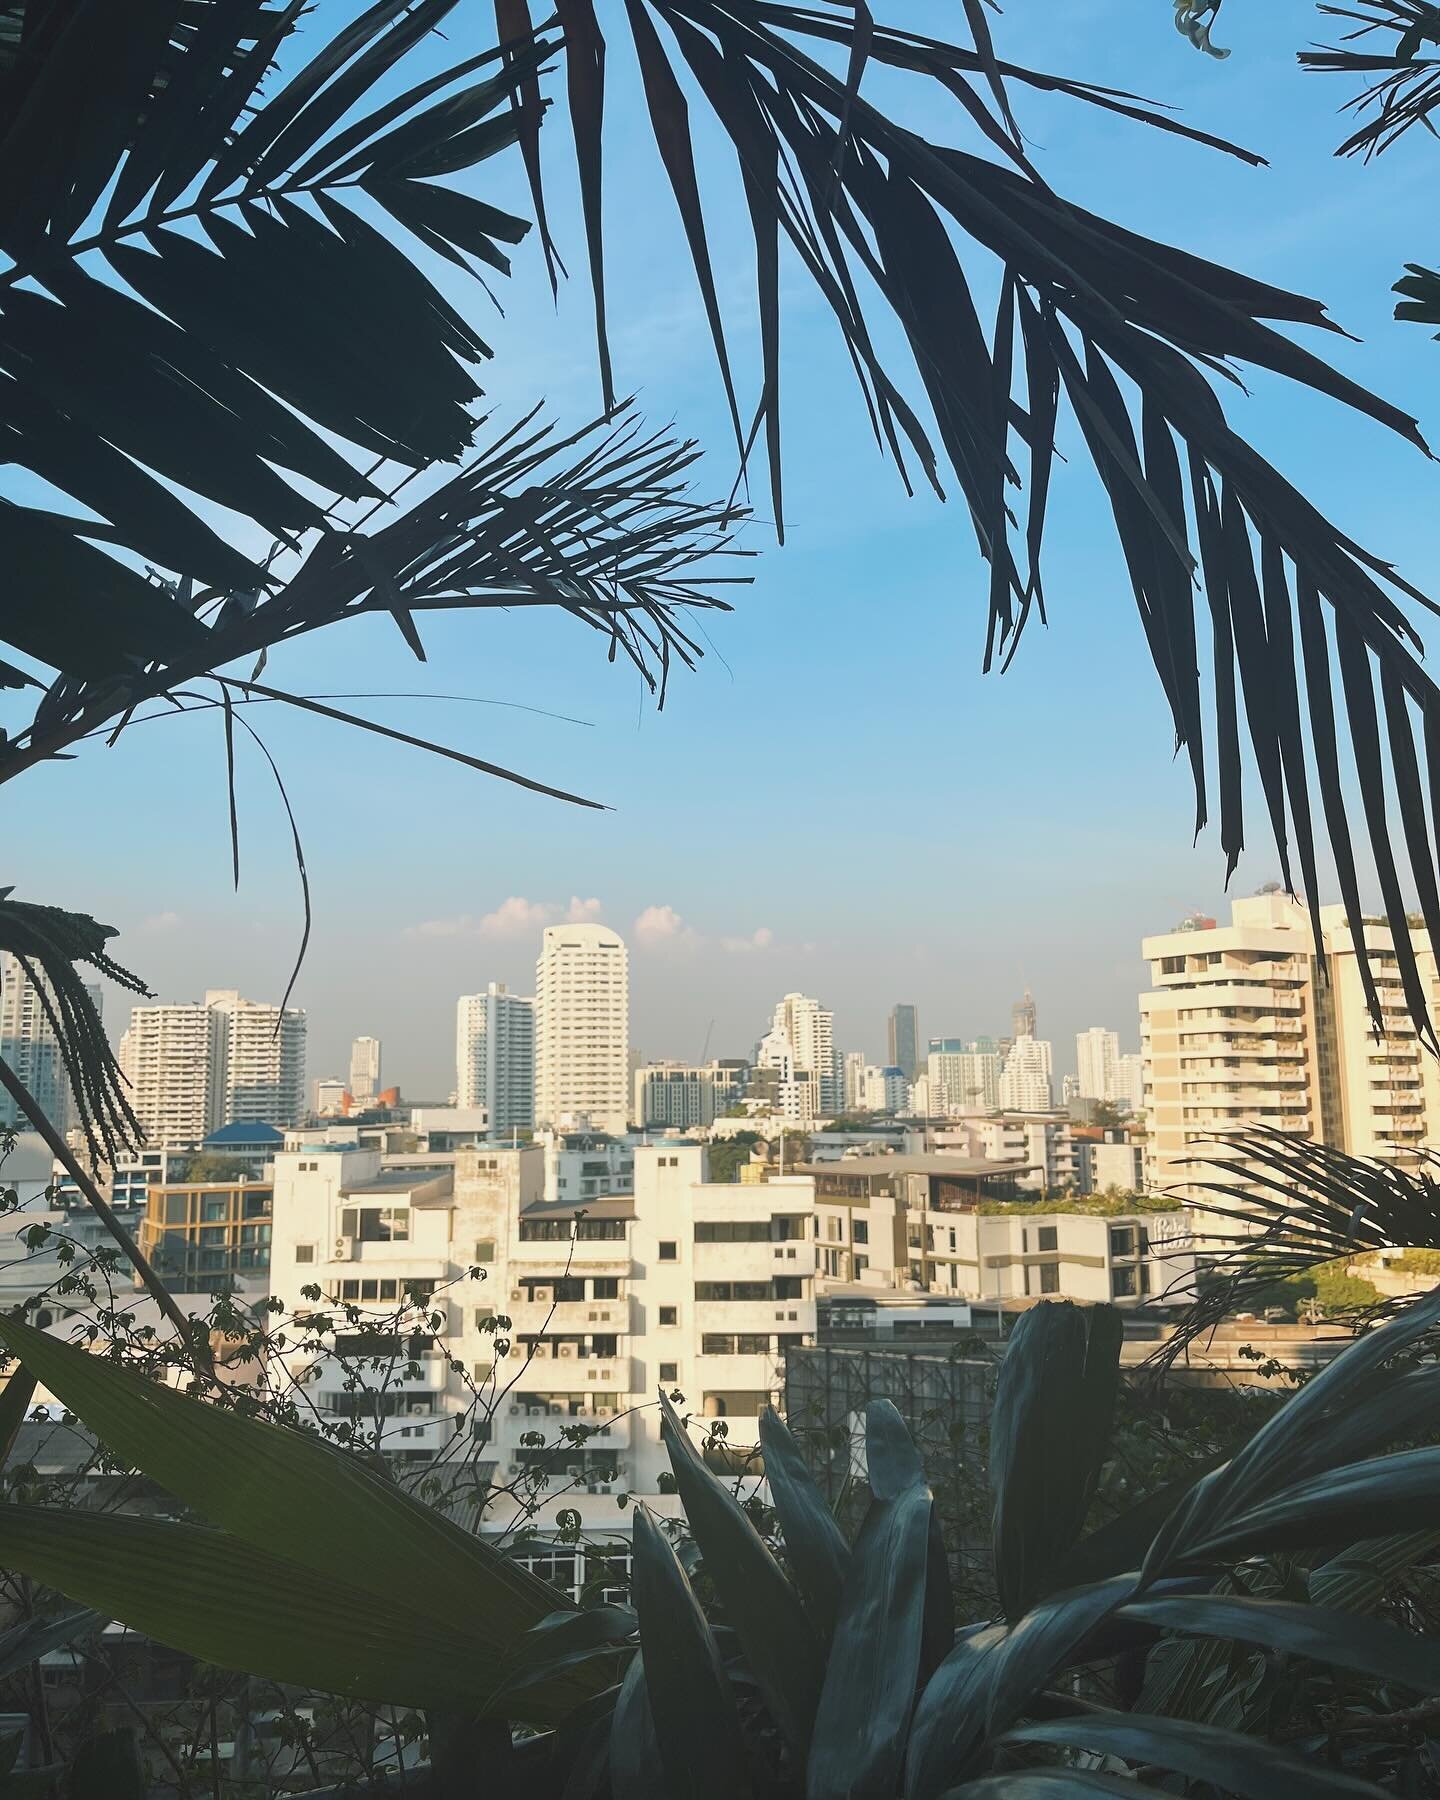 Easing myself into Bangkok by taking it one neighbourhood at a time. I&rsquo;m currently based in Thonglor, which I&rsquo;ve been told is one of the &lsquo;cooler&rsquo; areas of the city (why is saying cool so uncool). When I arrived late at night I